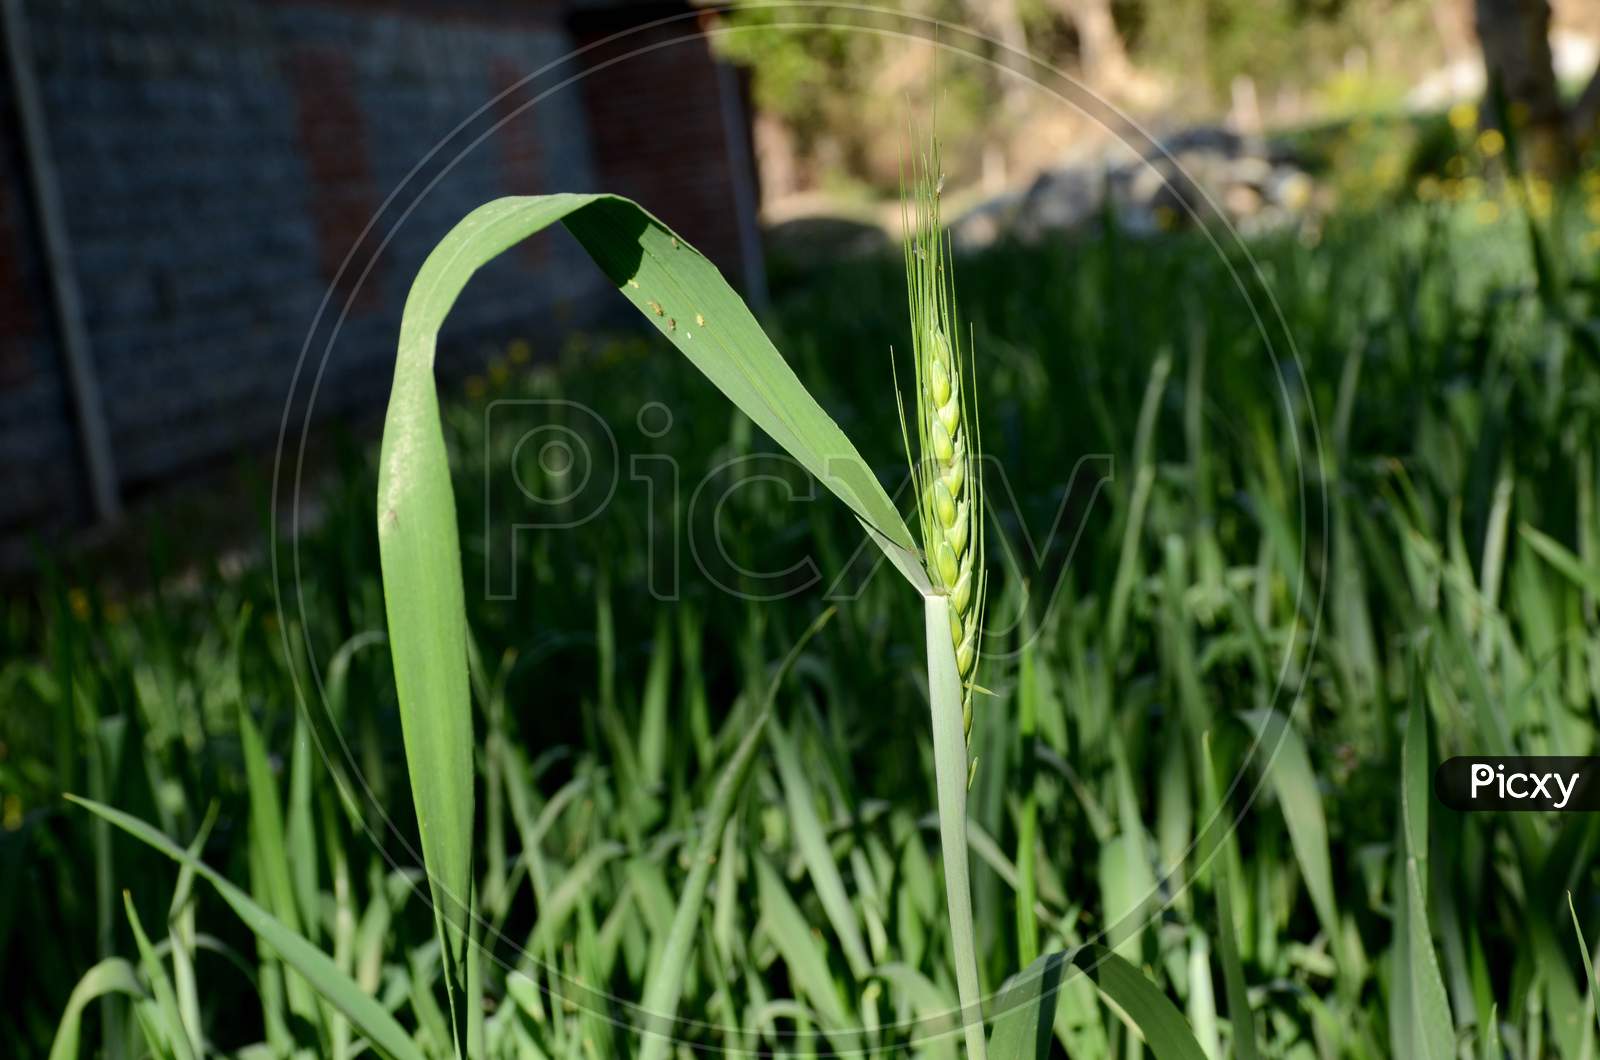 The Green Ripe Wheat Stitch With Green Plants In The Farm.